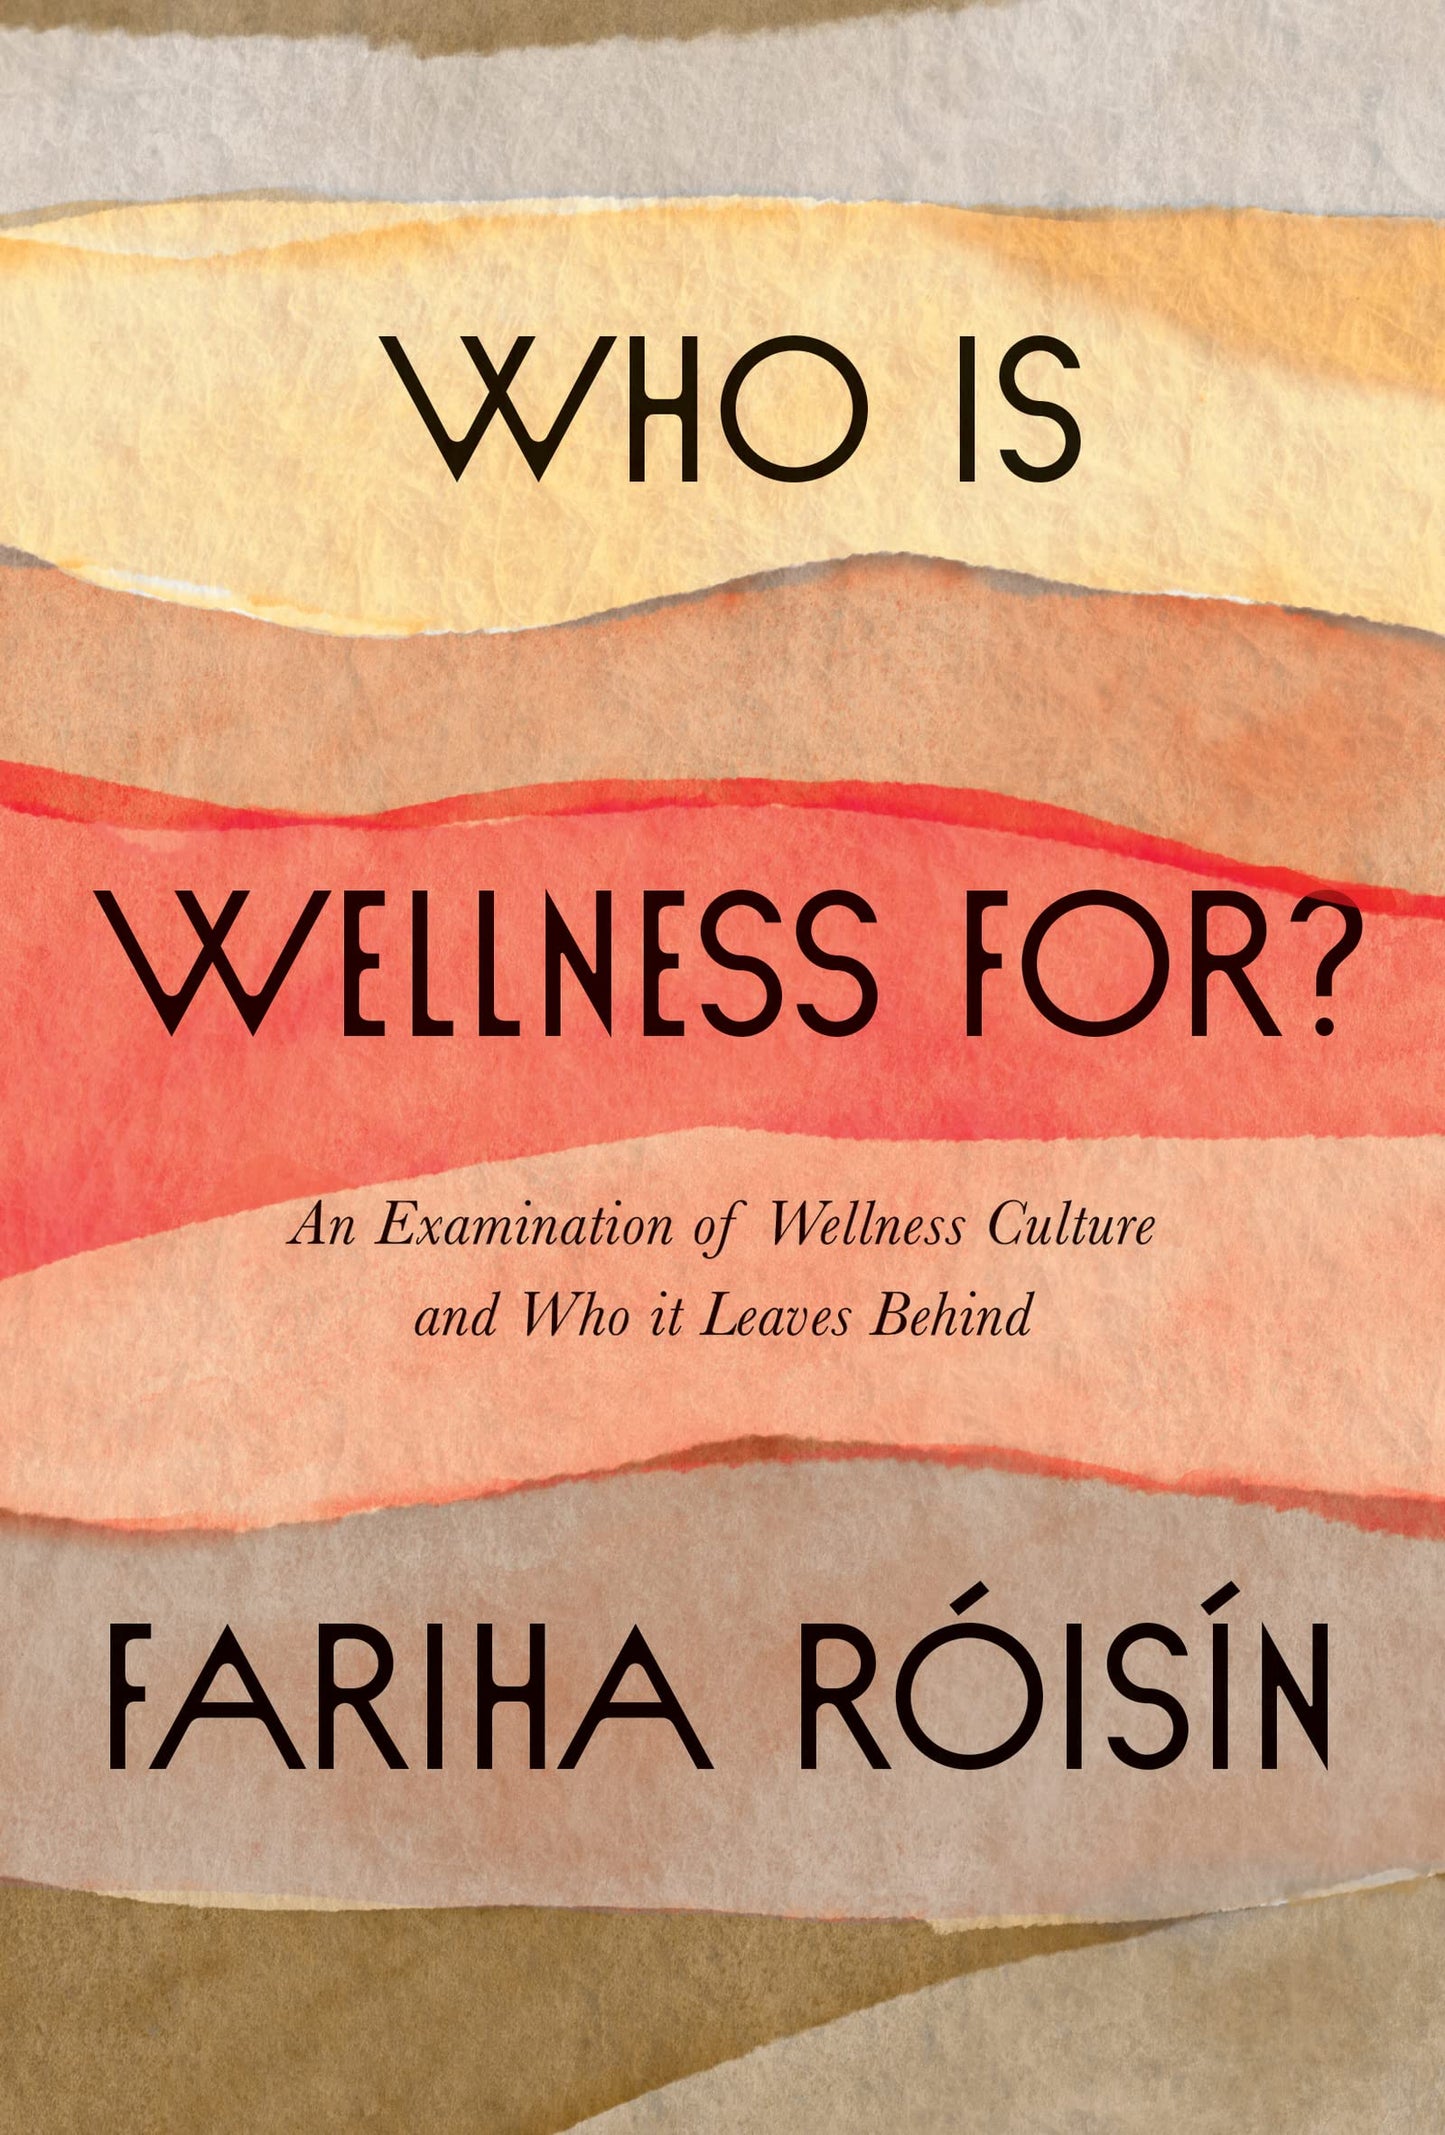 Who Is Wellness For? // An Examination of Wellness Culture and Who It Leaves Behind